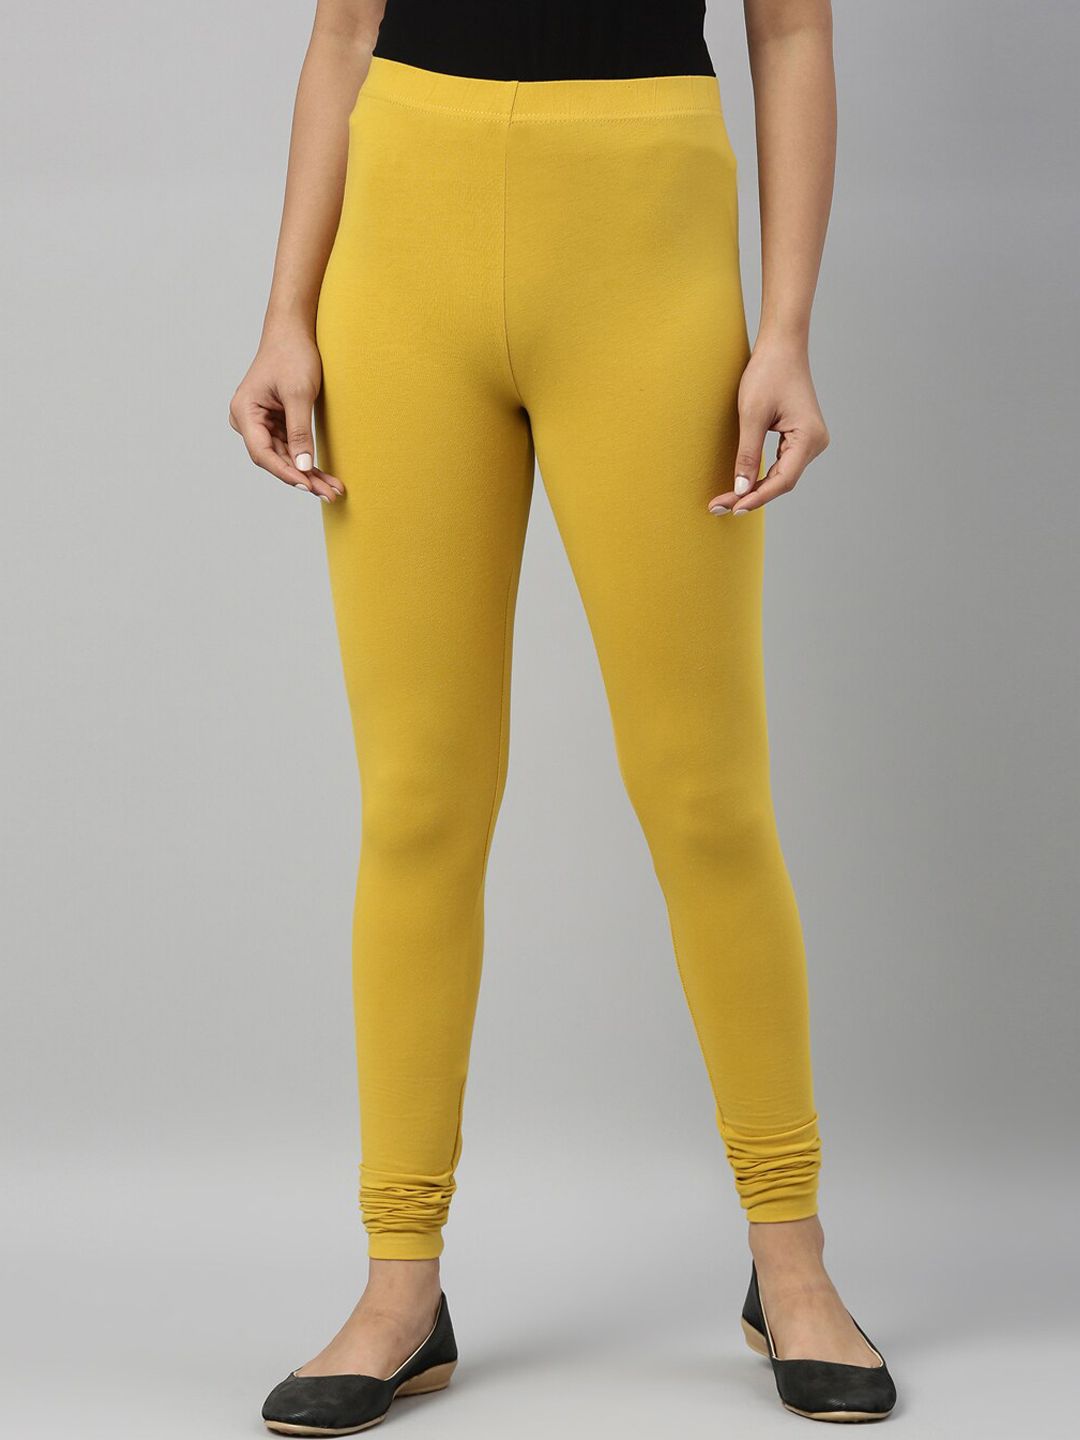 Go Colors Women Yellow Solid Churidar-Length Cotton Leggings Price in India